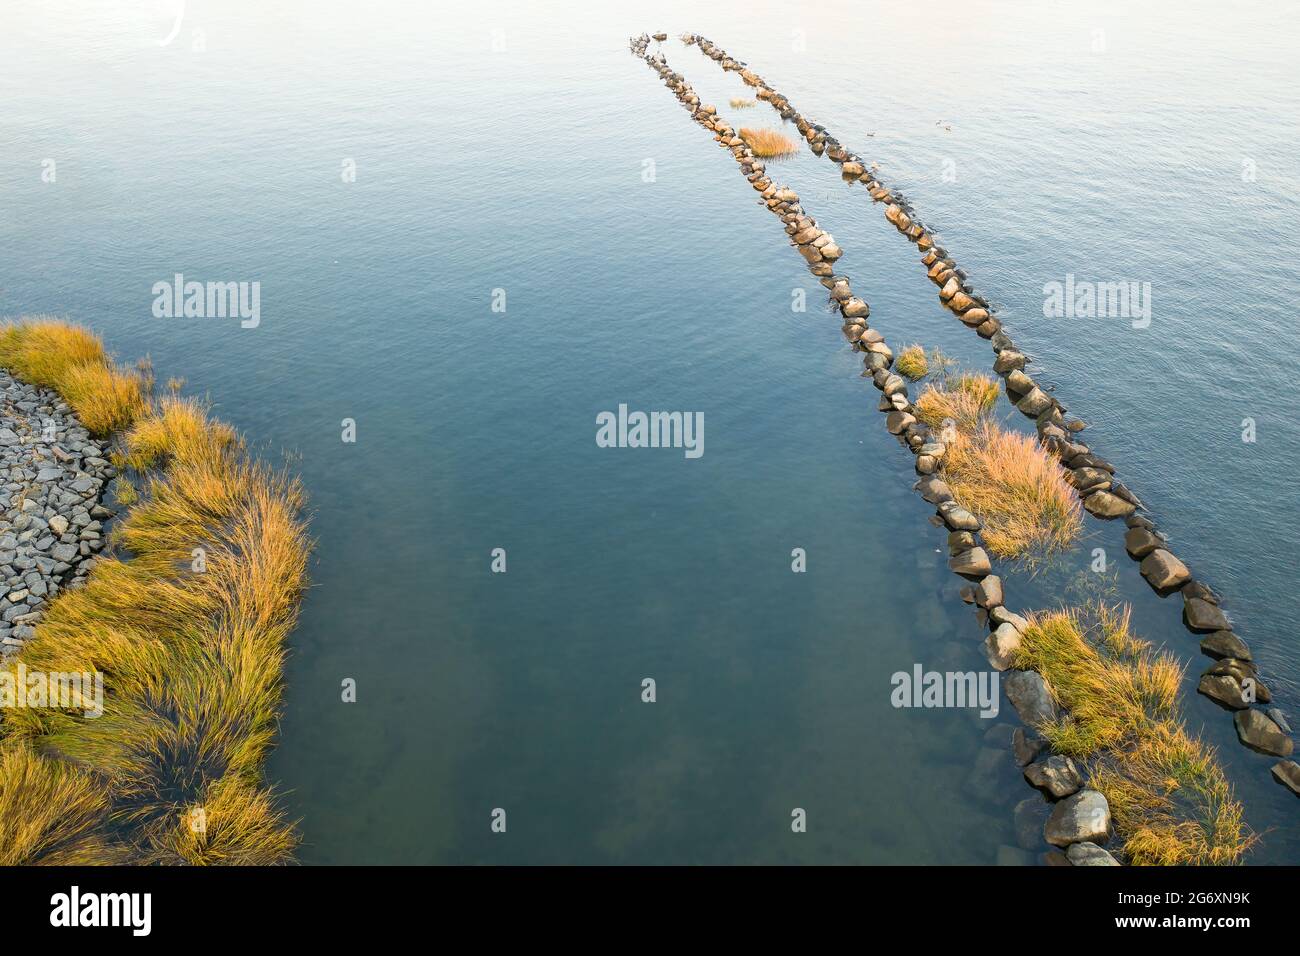 Aerial of calm water with a row of large rocks covered in sea grass jutting out into the bay. Stock Photo